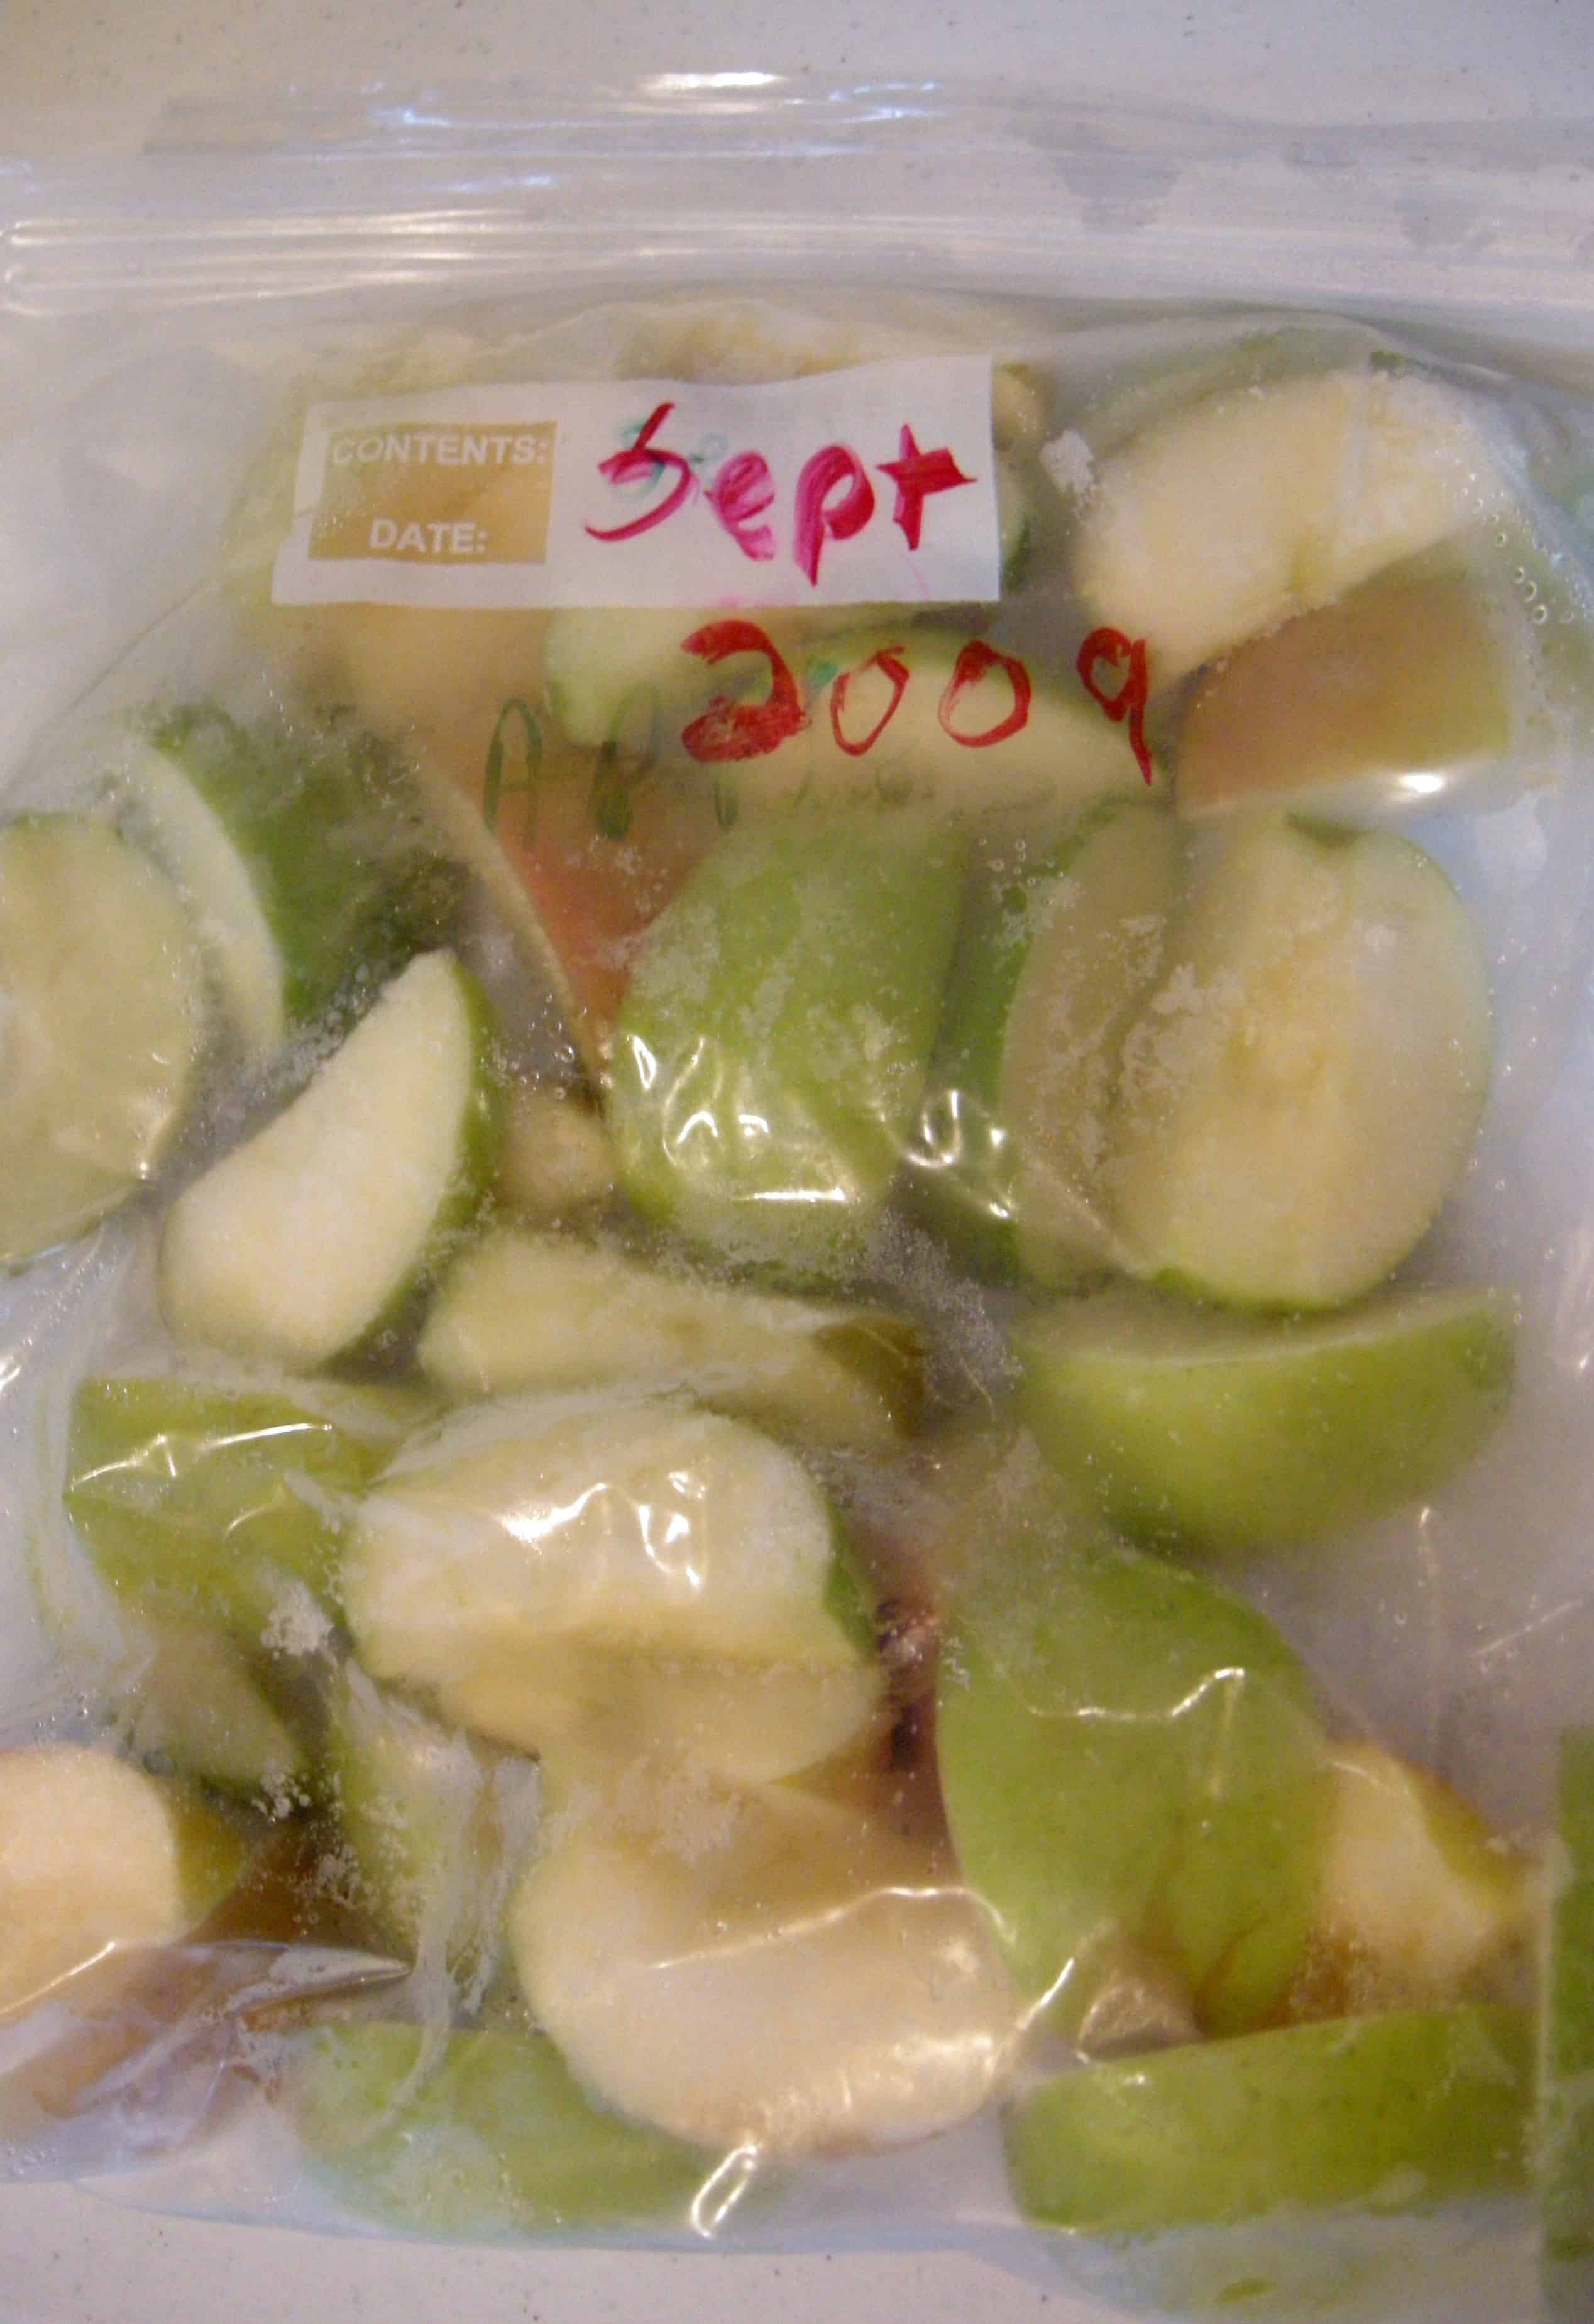 Freezing Apples - and what the old folks taught me ...